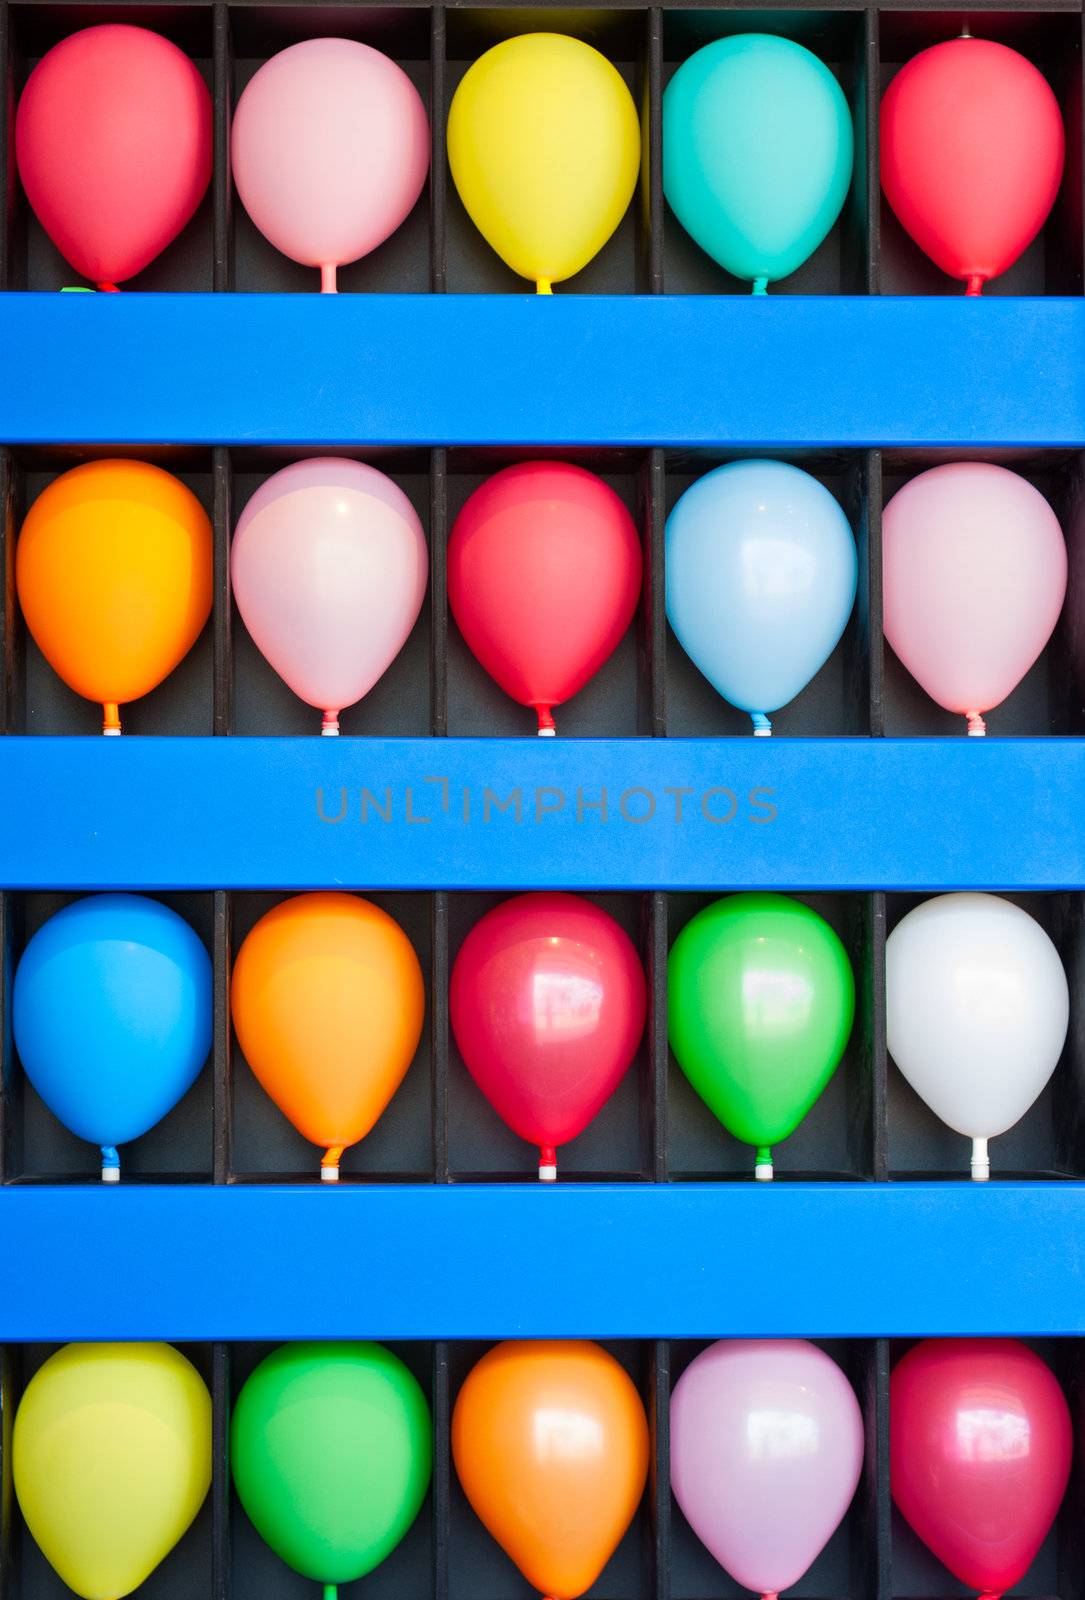 Wall of Balloons by sbonk